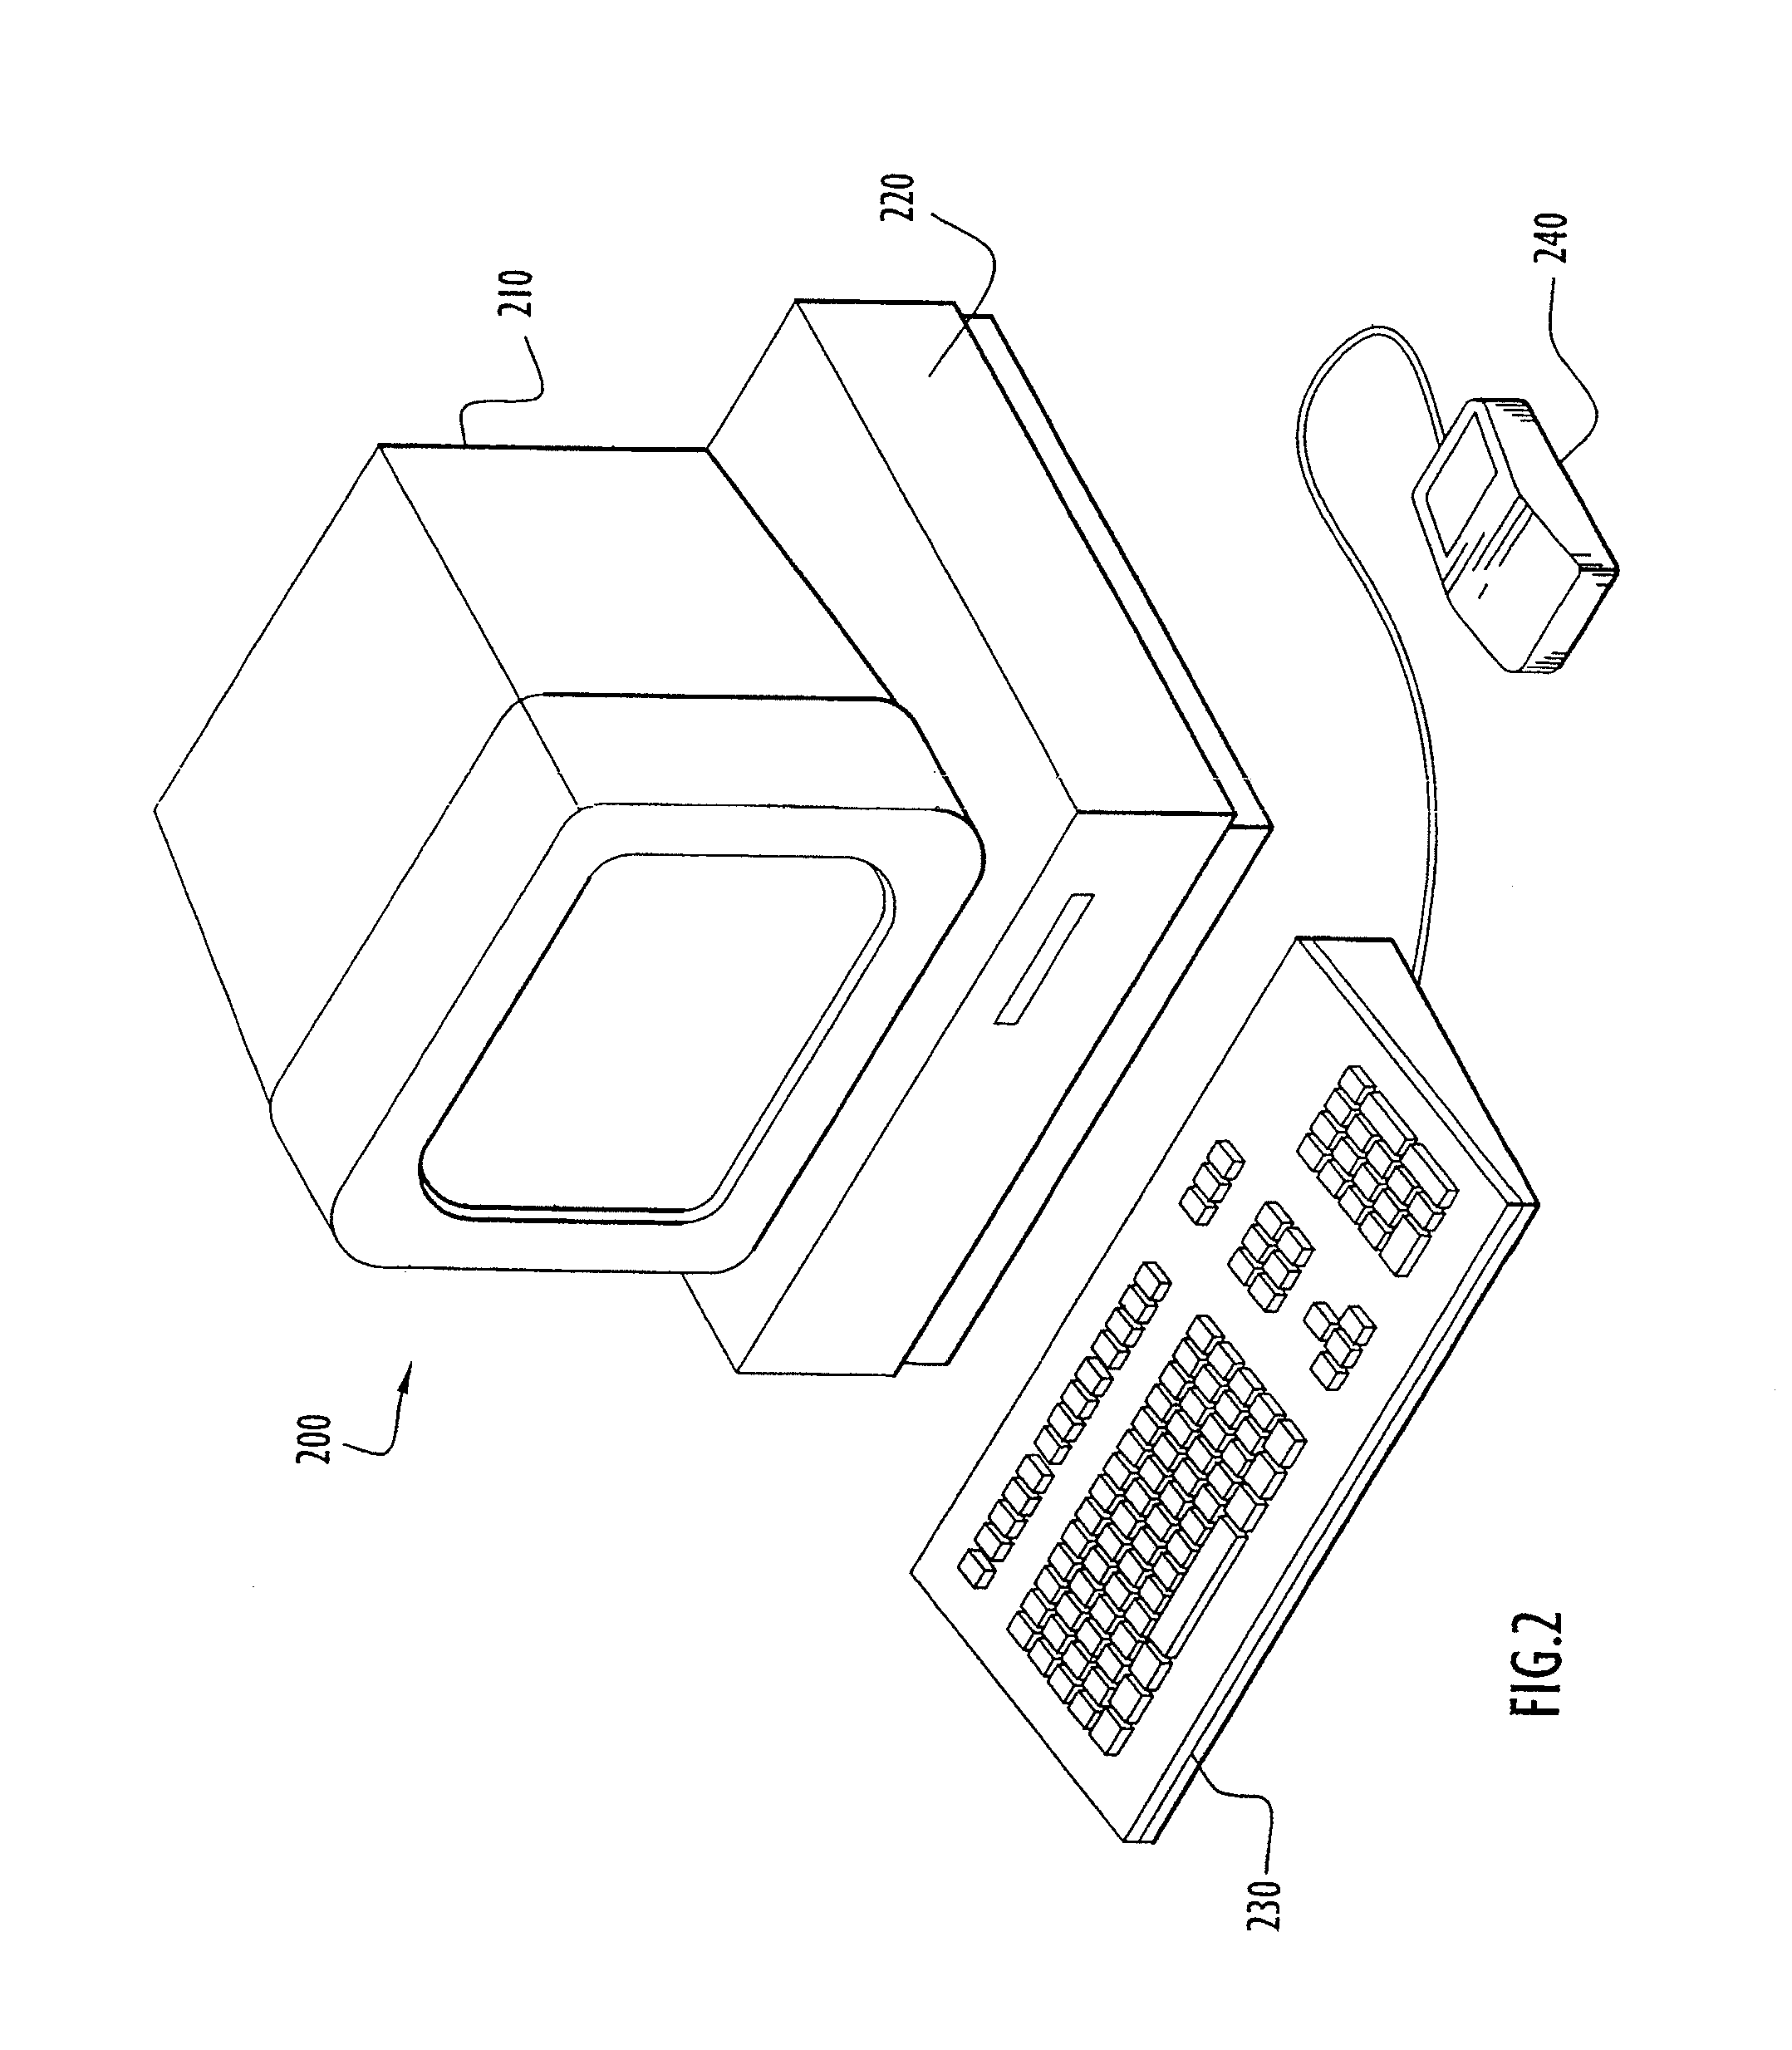 Electronic payment transaction system